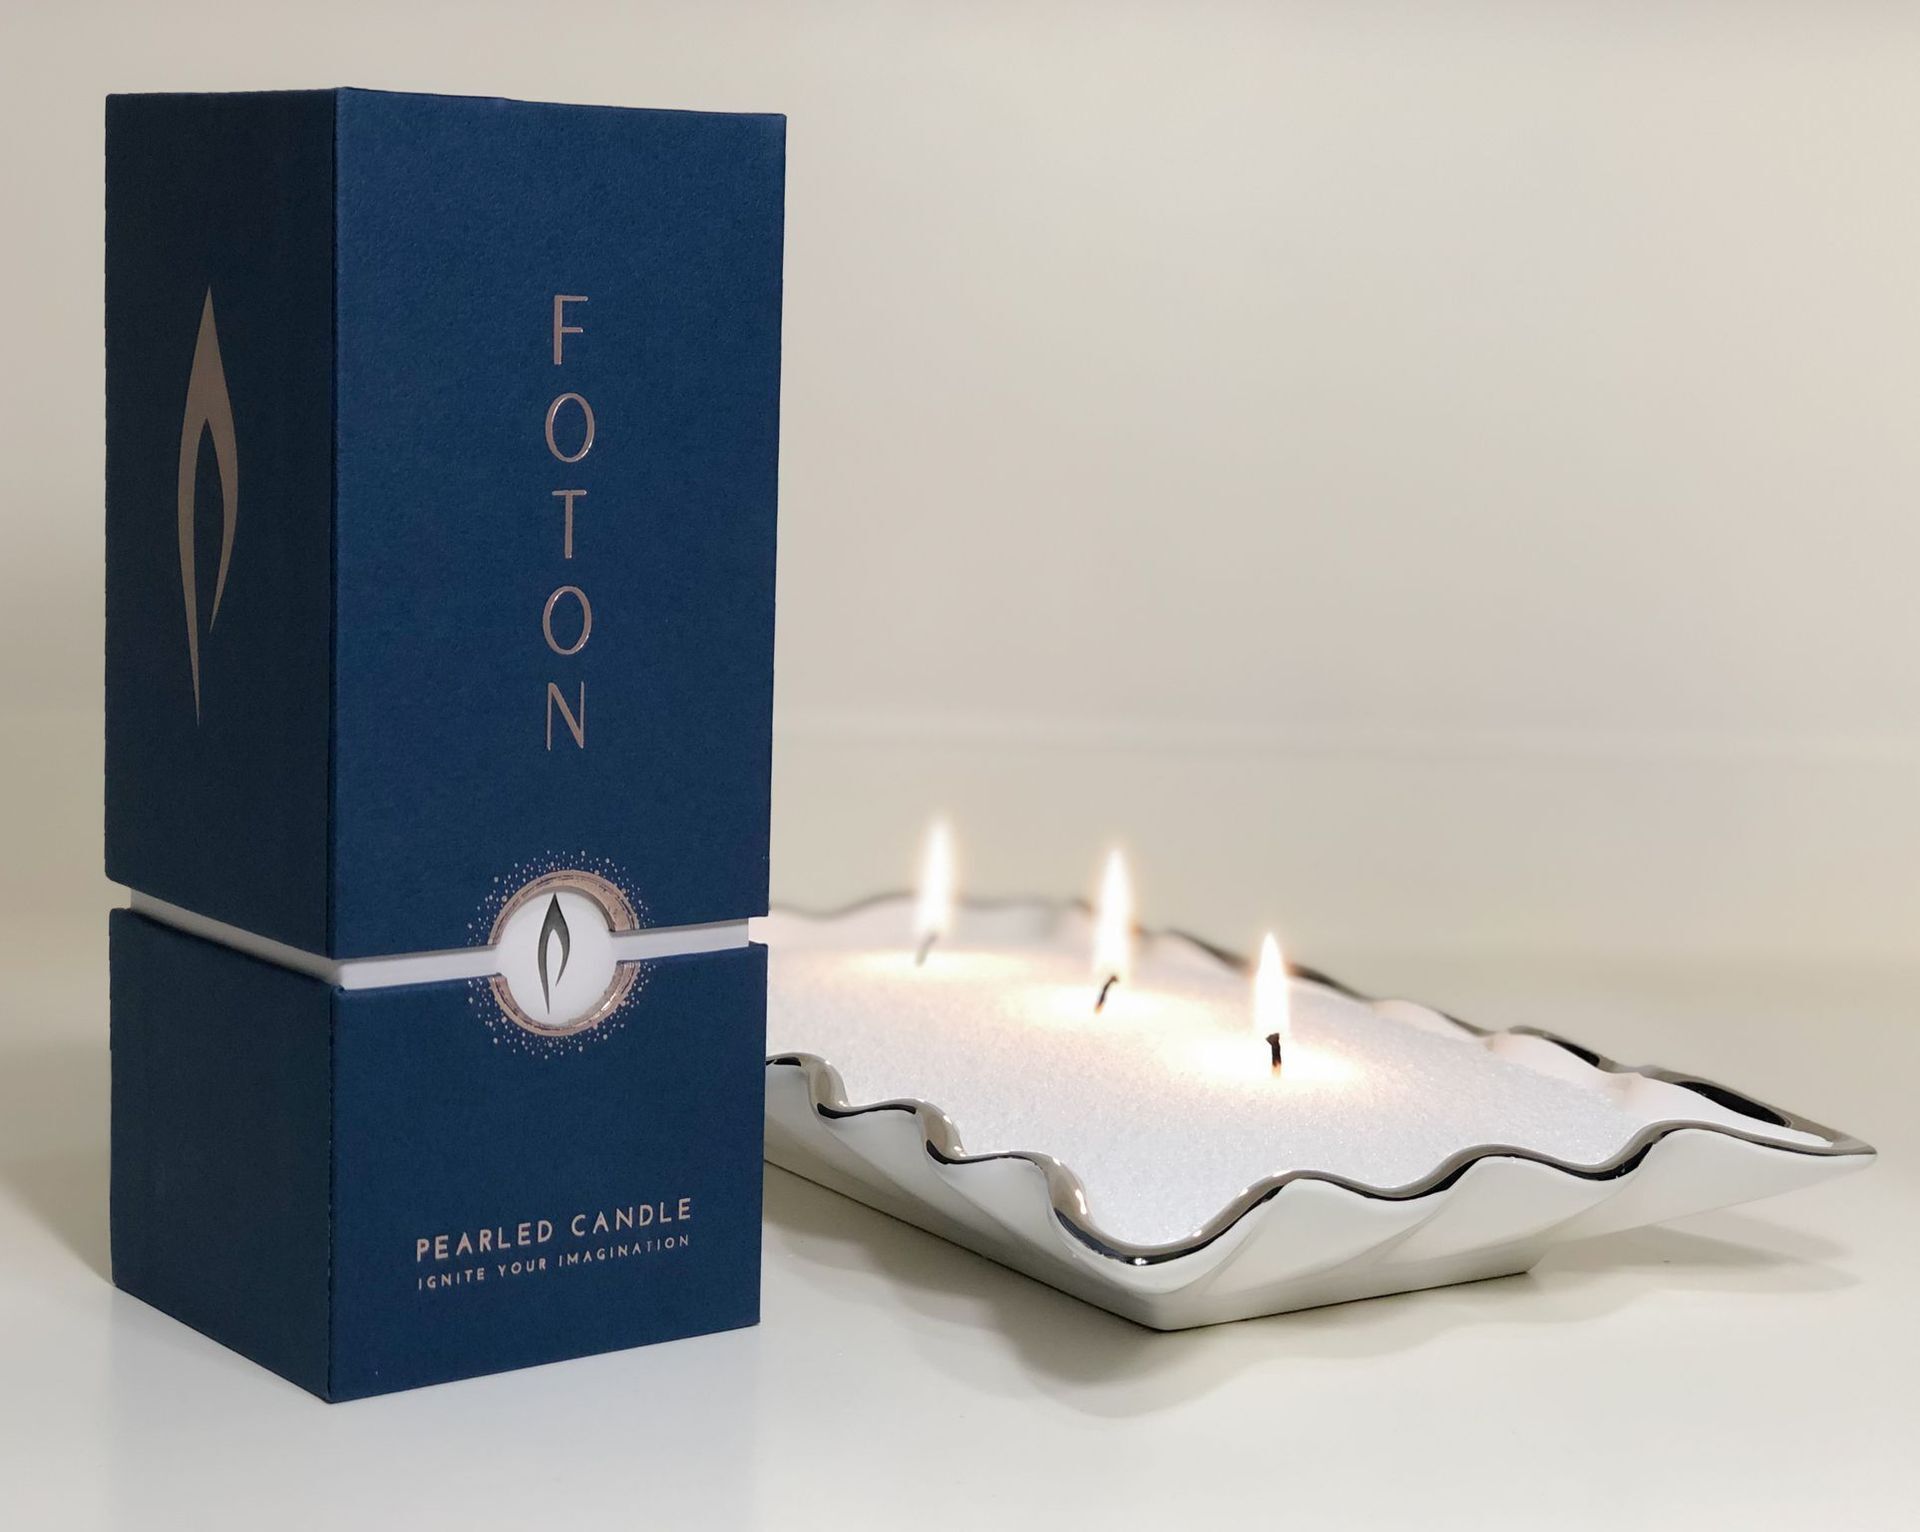 Foton Pearled Candle - Lazy Lulu is sweet and tropical, designed to smell  like a lazy day on Honolulu beach.